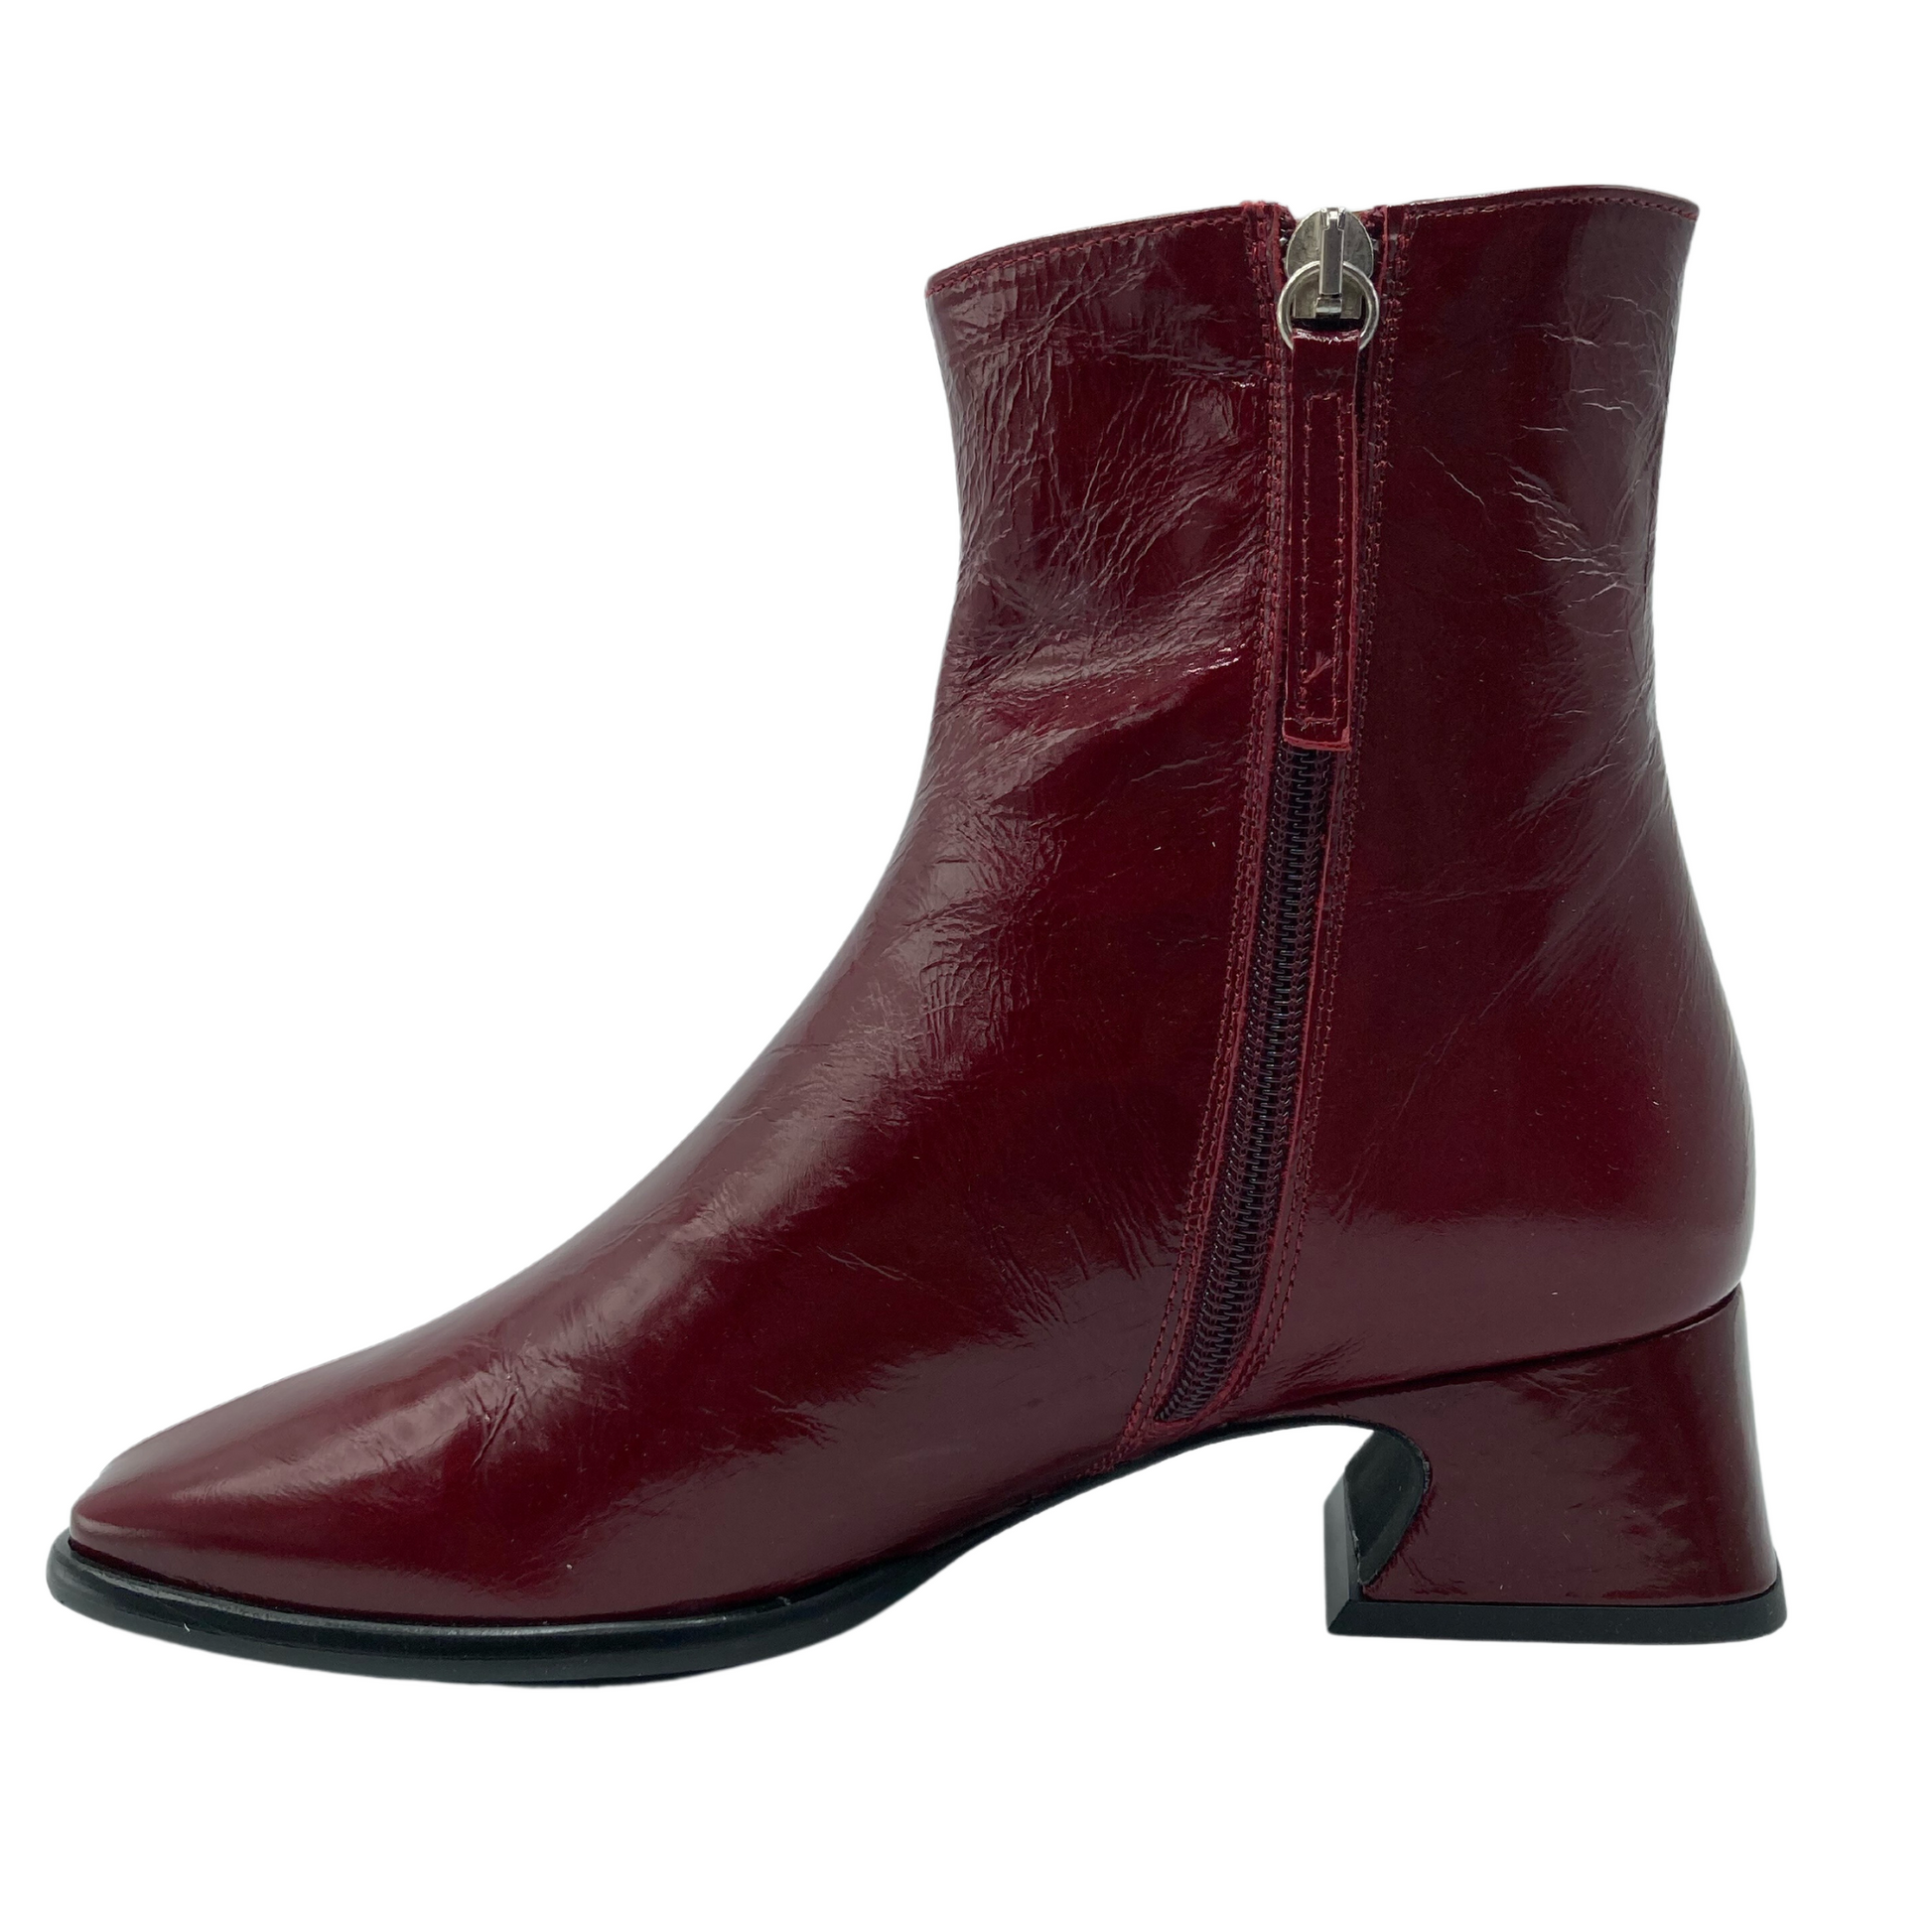 Left facing view of red leather short boot with side zipper closure